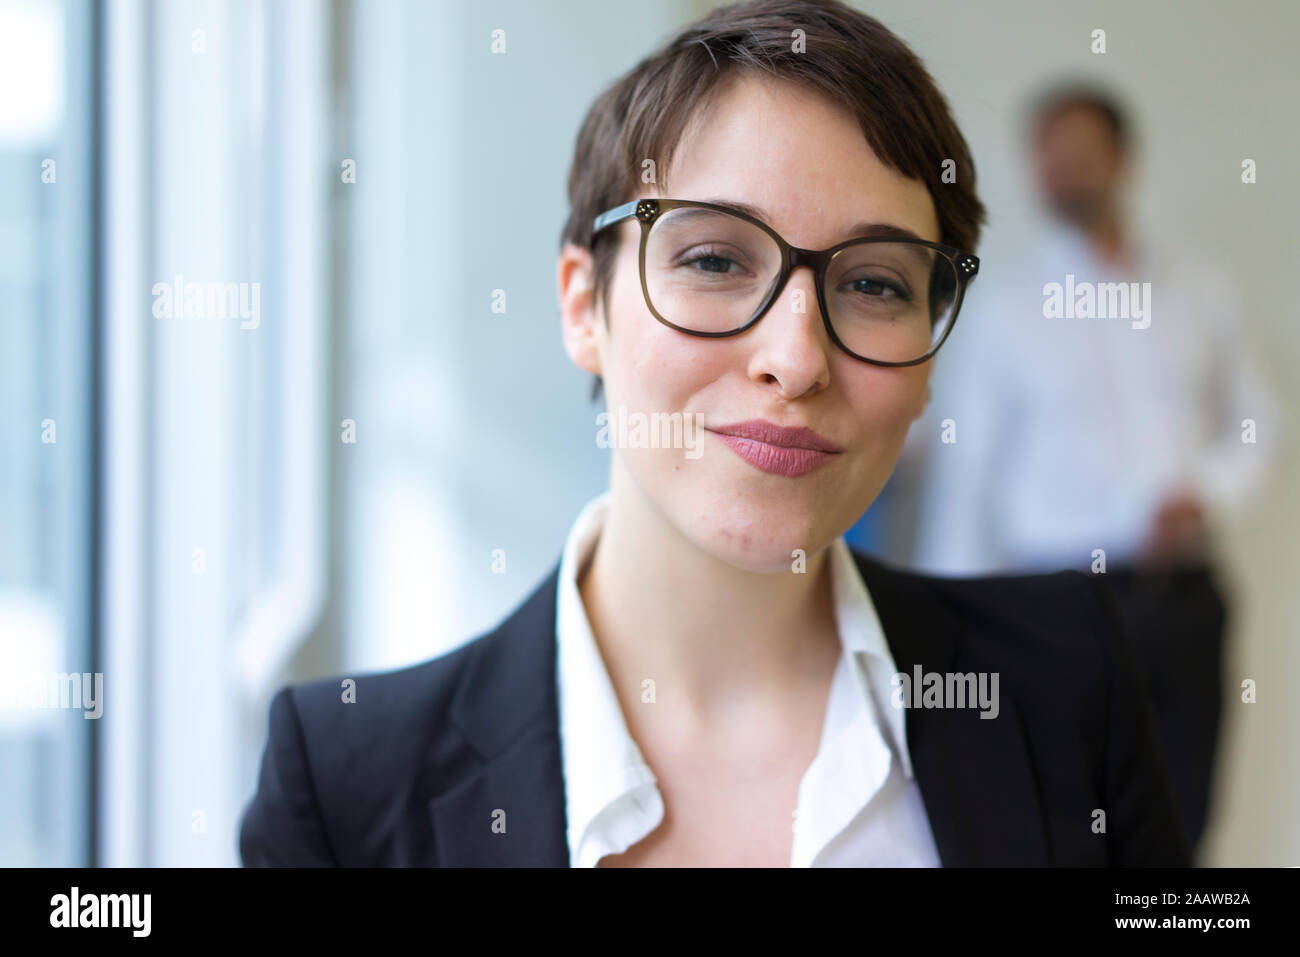 Portait of confident young businesswoman with man in background Stock Photo